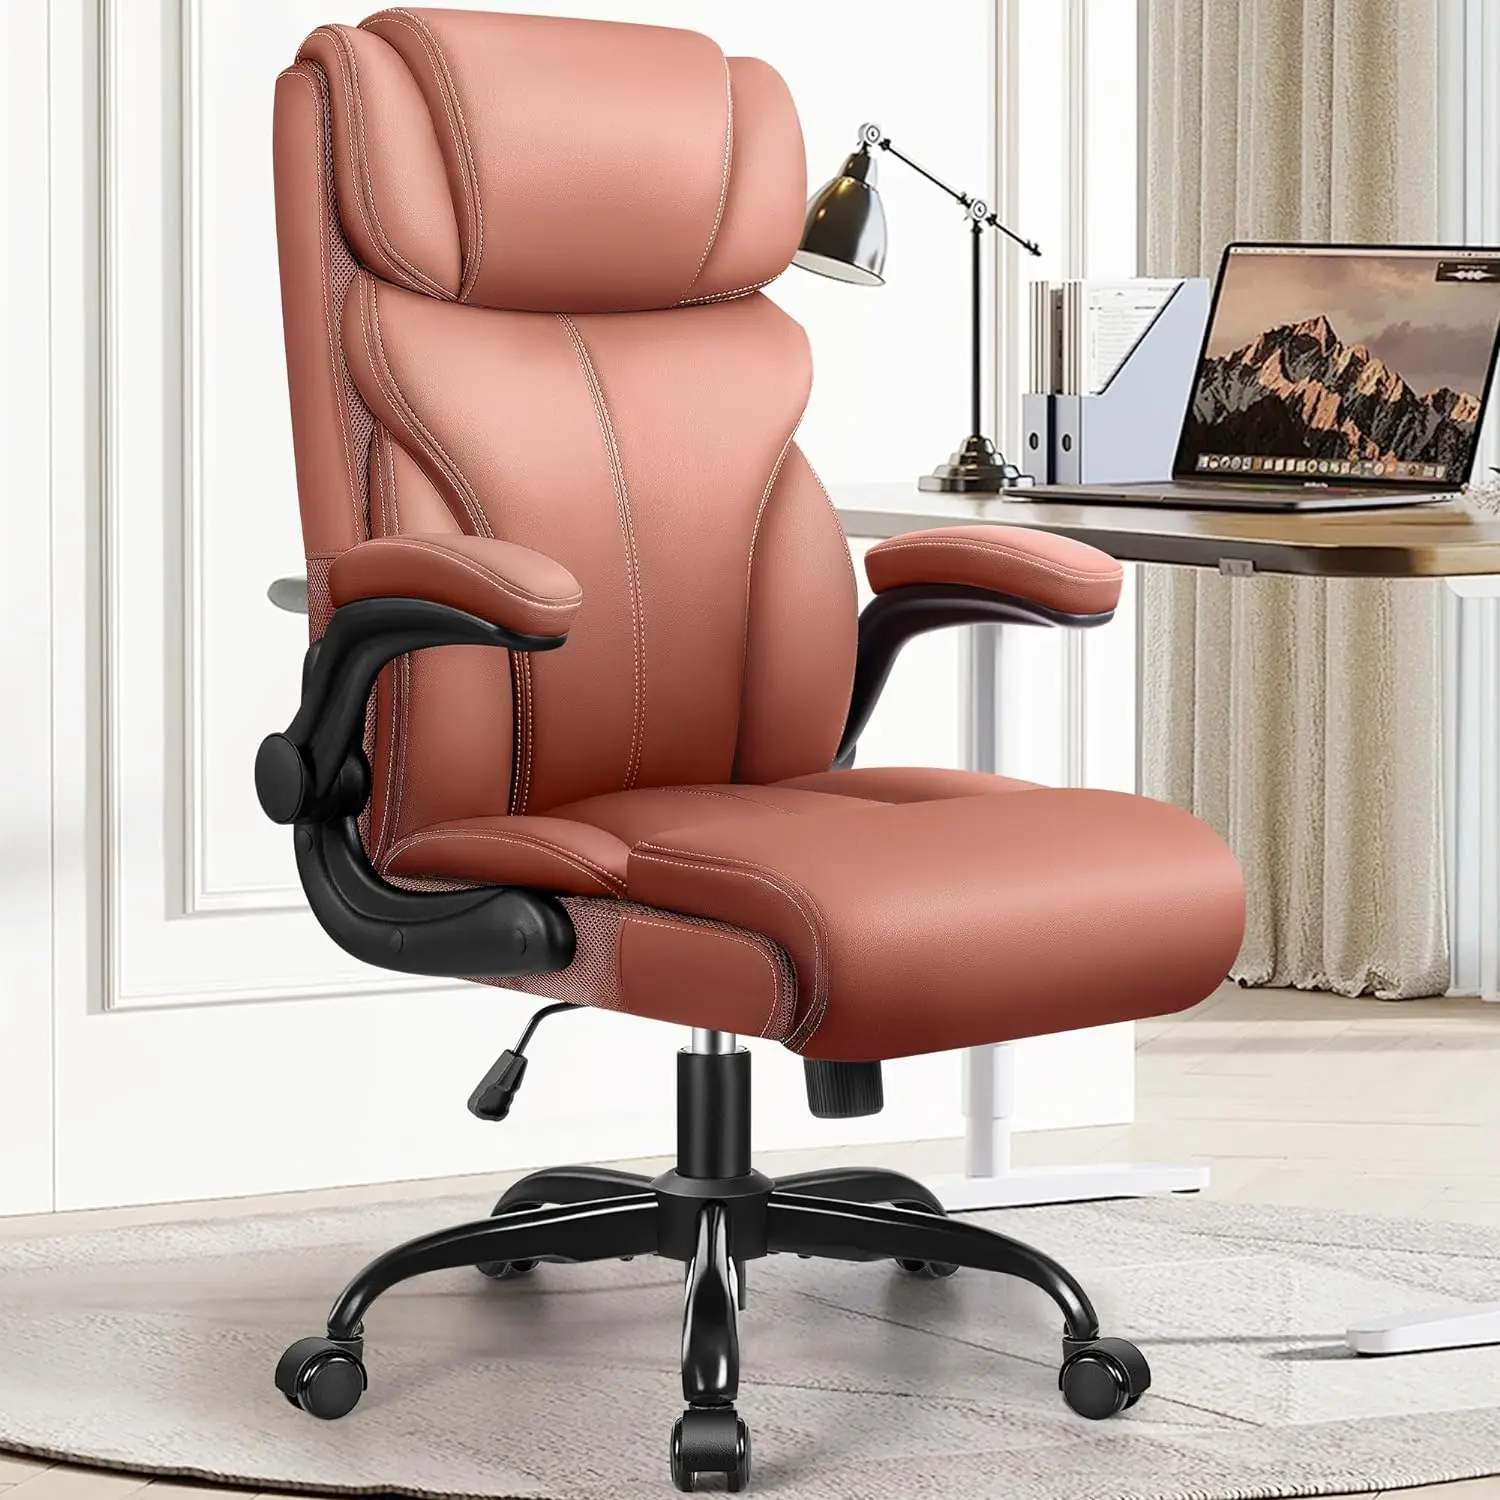 

Office Chair, Ergonomic Big and Tall Computer Desk Chairs, Executive Breathable Leather Chair with Adjustable High Back Flip-up